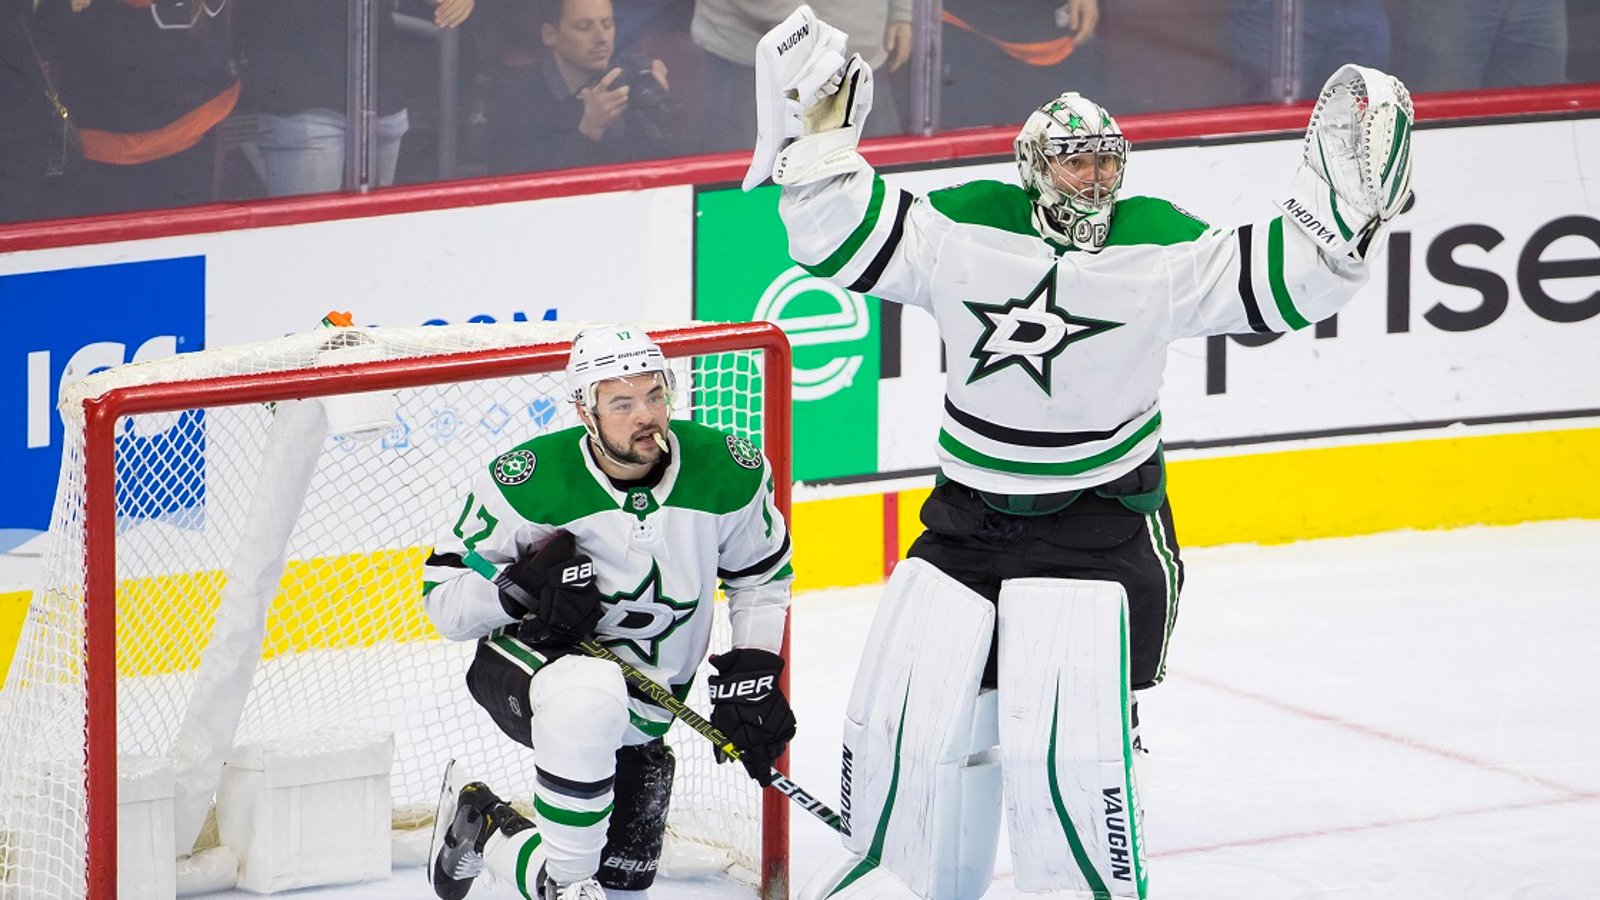 Furious, Anton Khudobin calls out his own team after yet another loss.